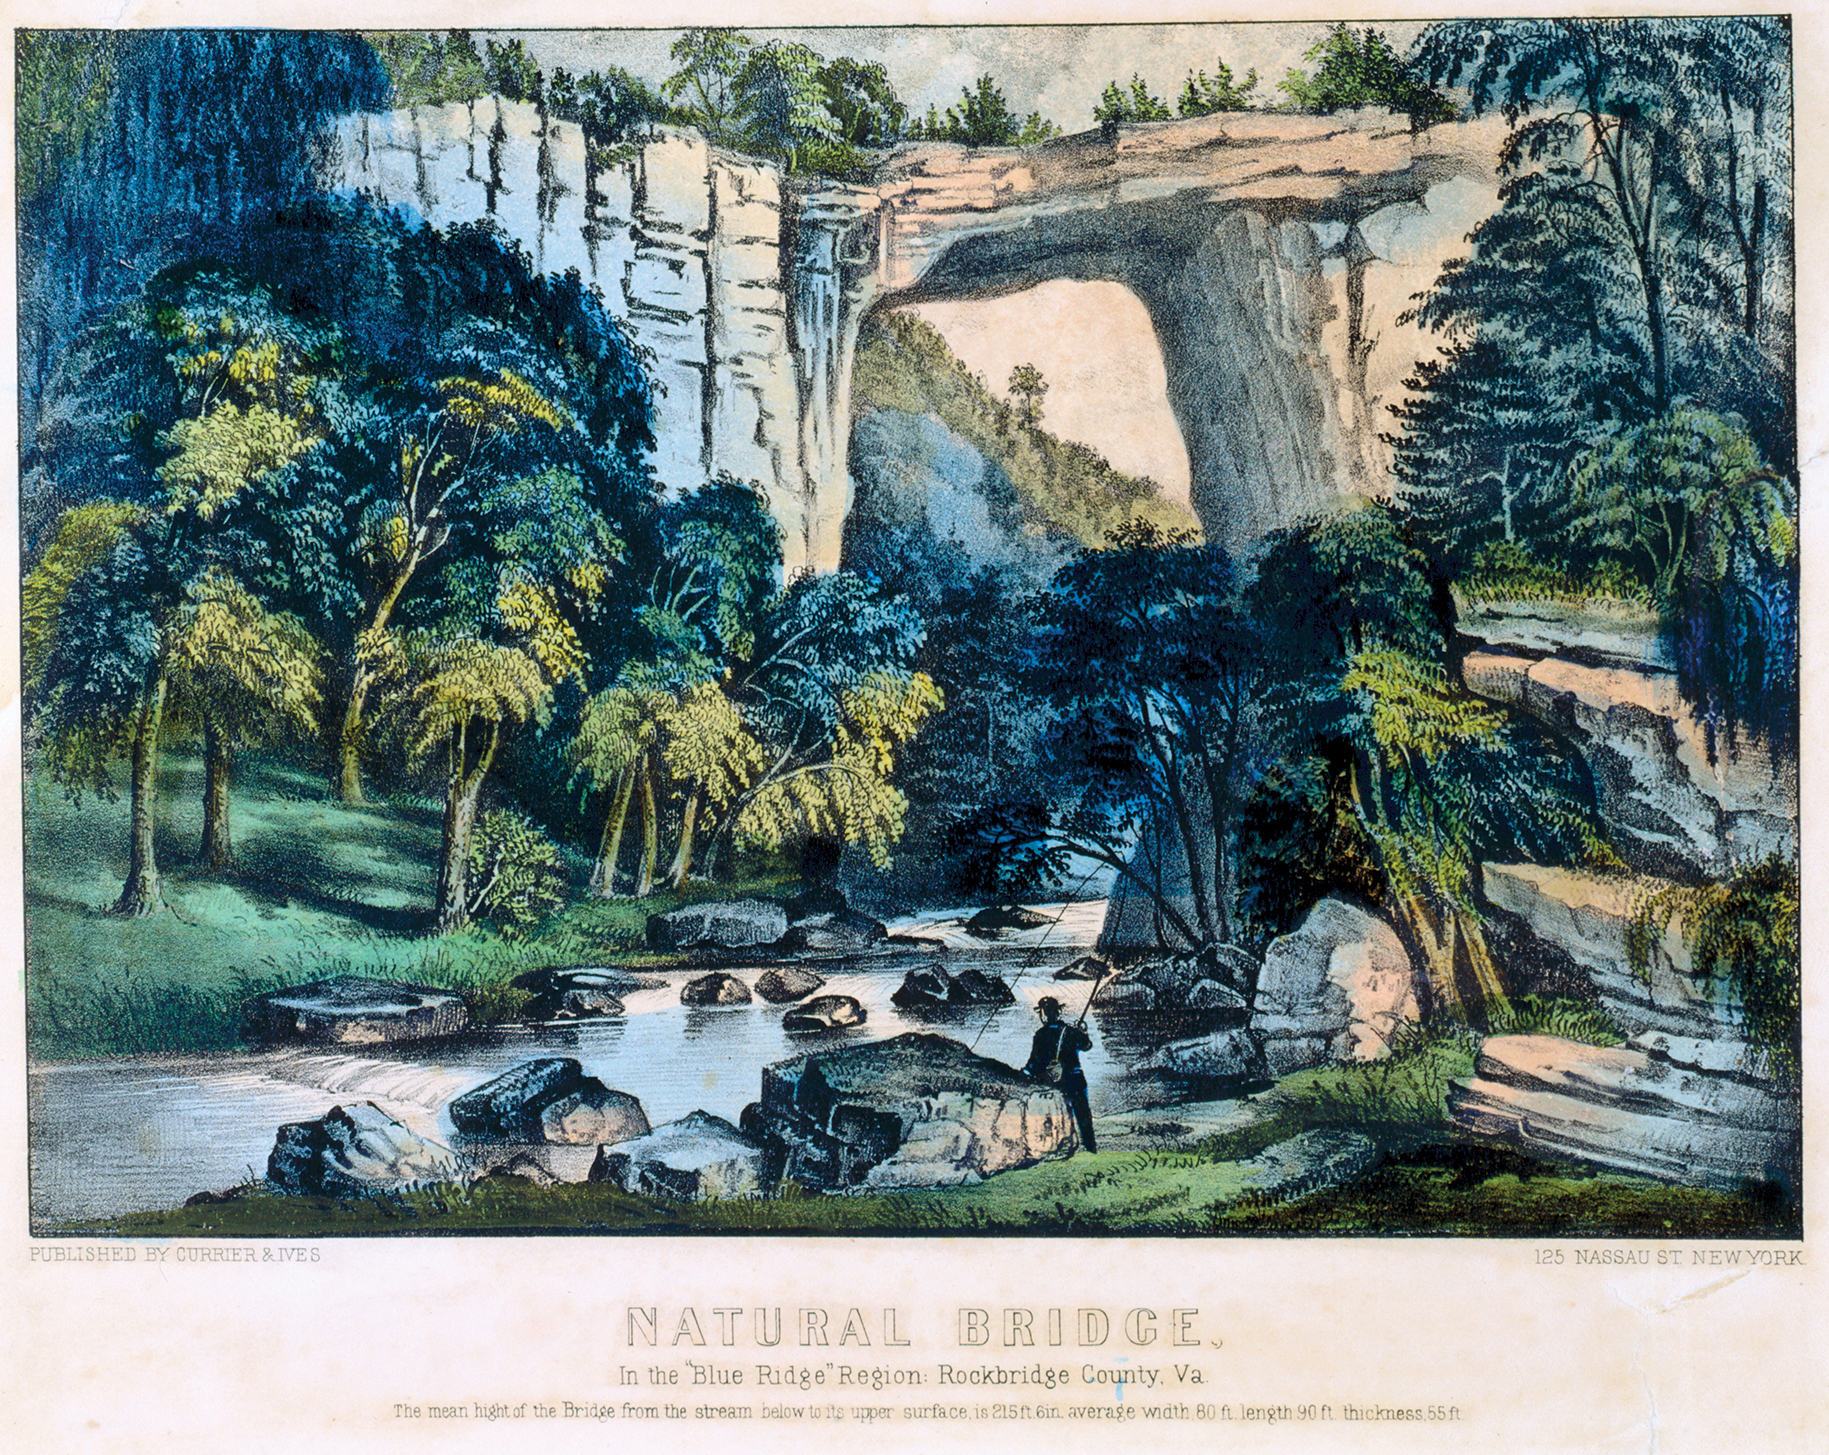 Currier and Ives, Natural Bridge, about 1860, hand-colored lithograph 